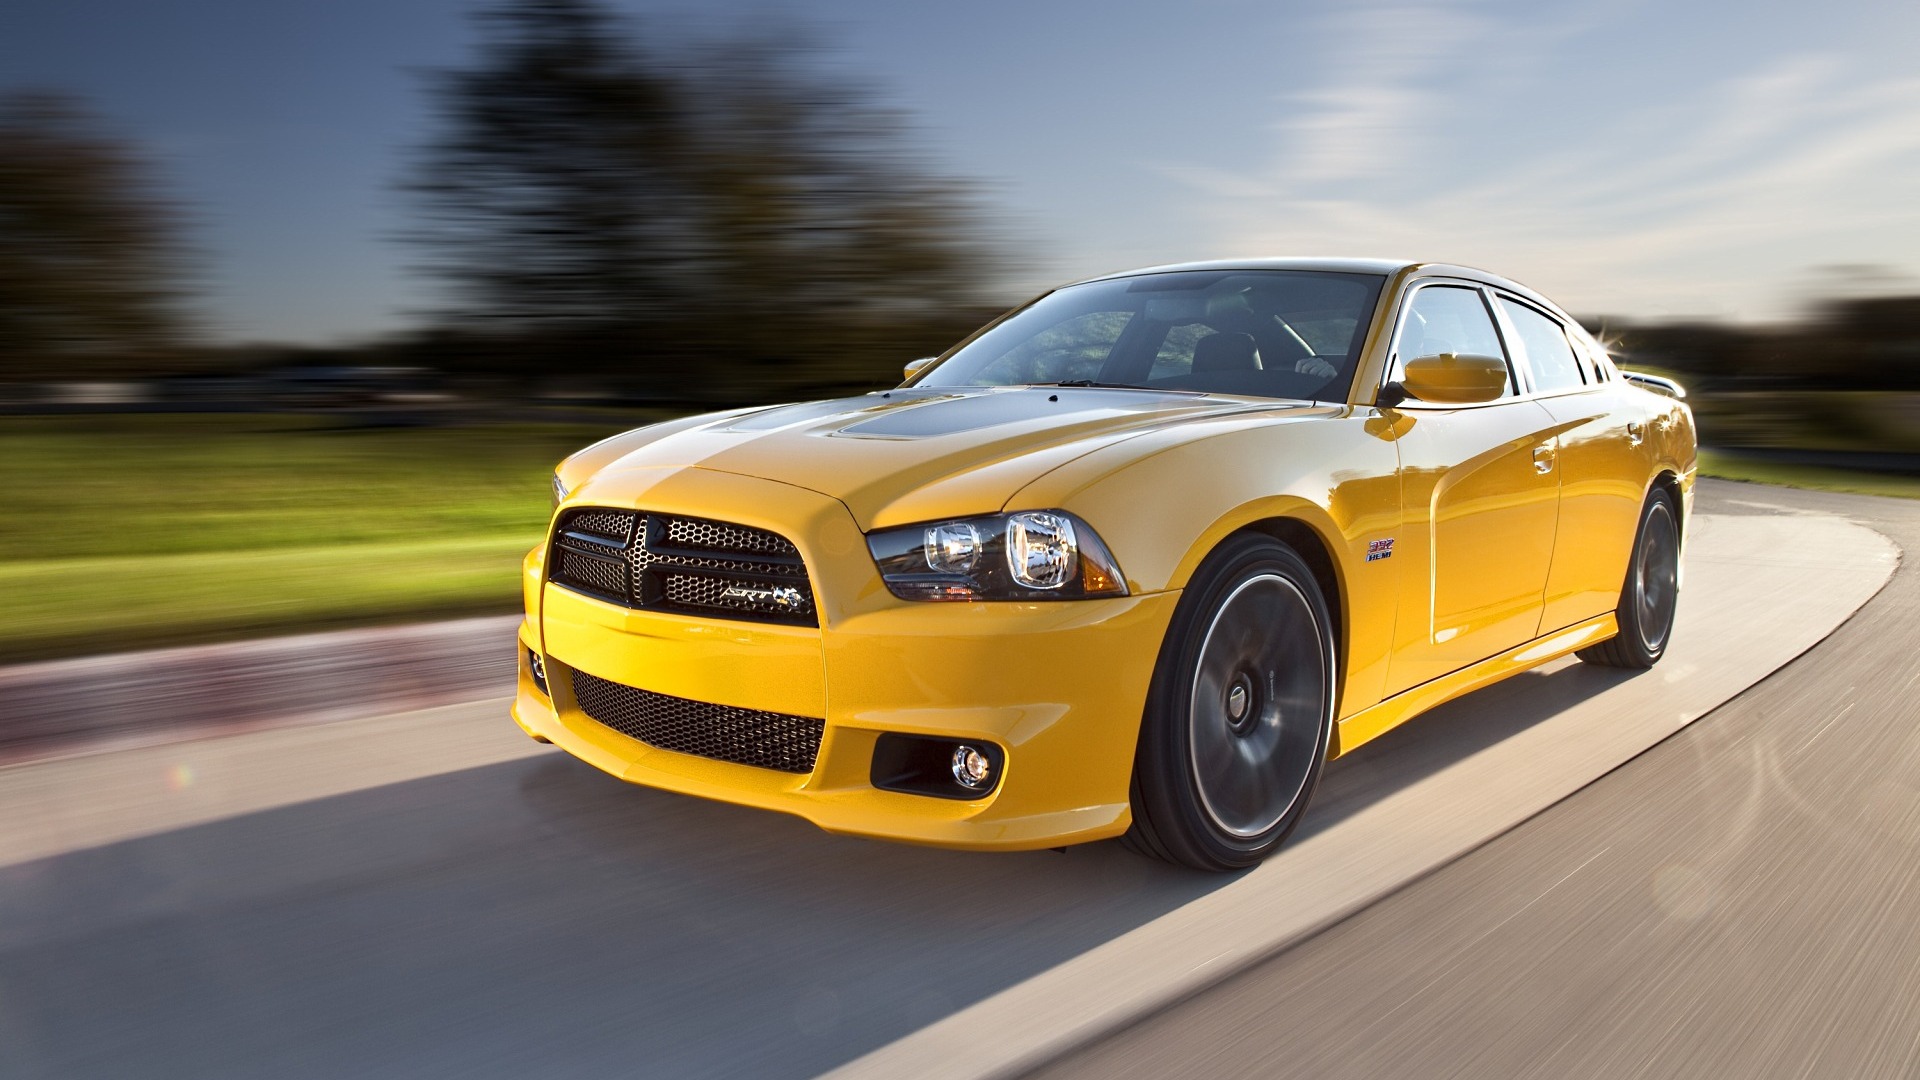 wallpaper details file name free dodge charger wallpaper uploaded by